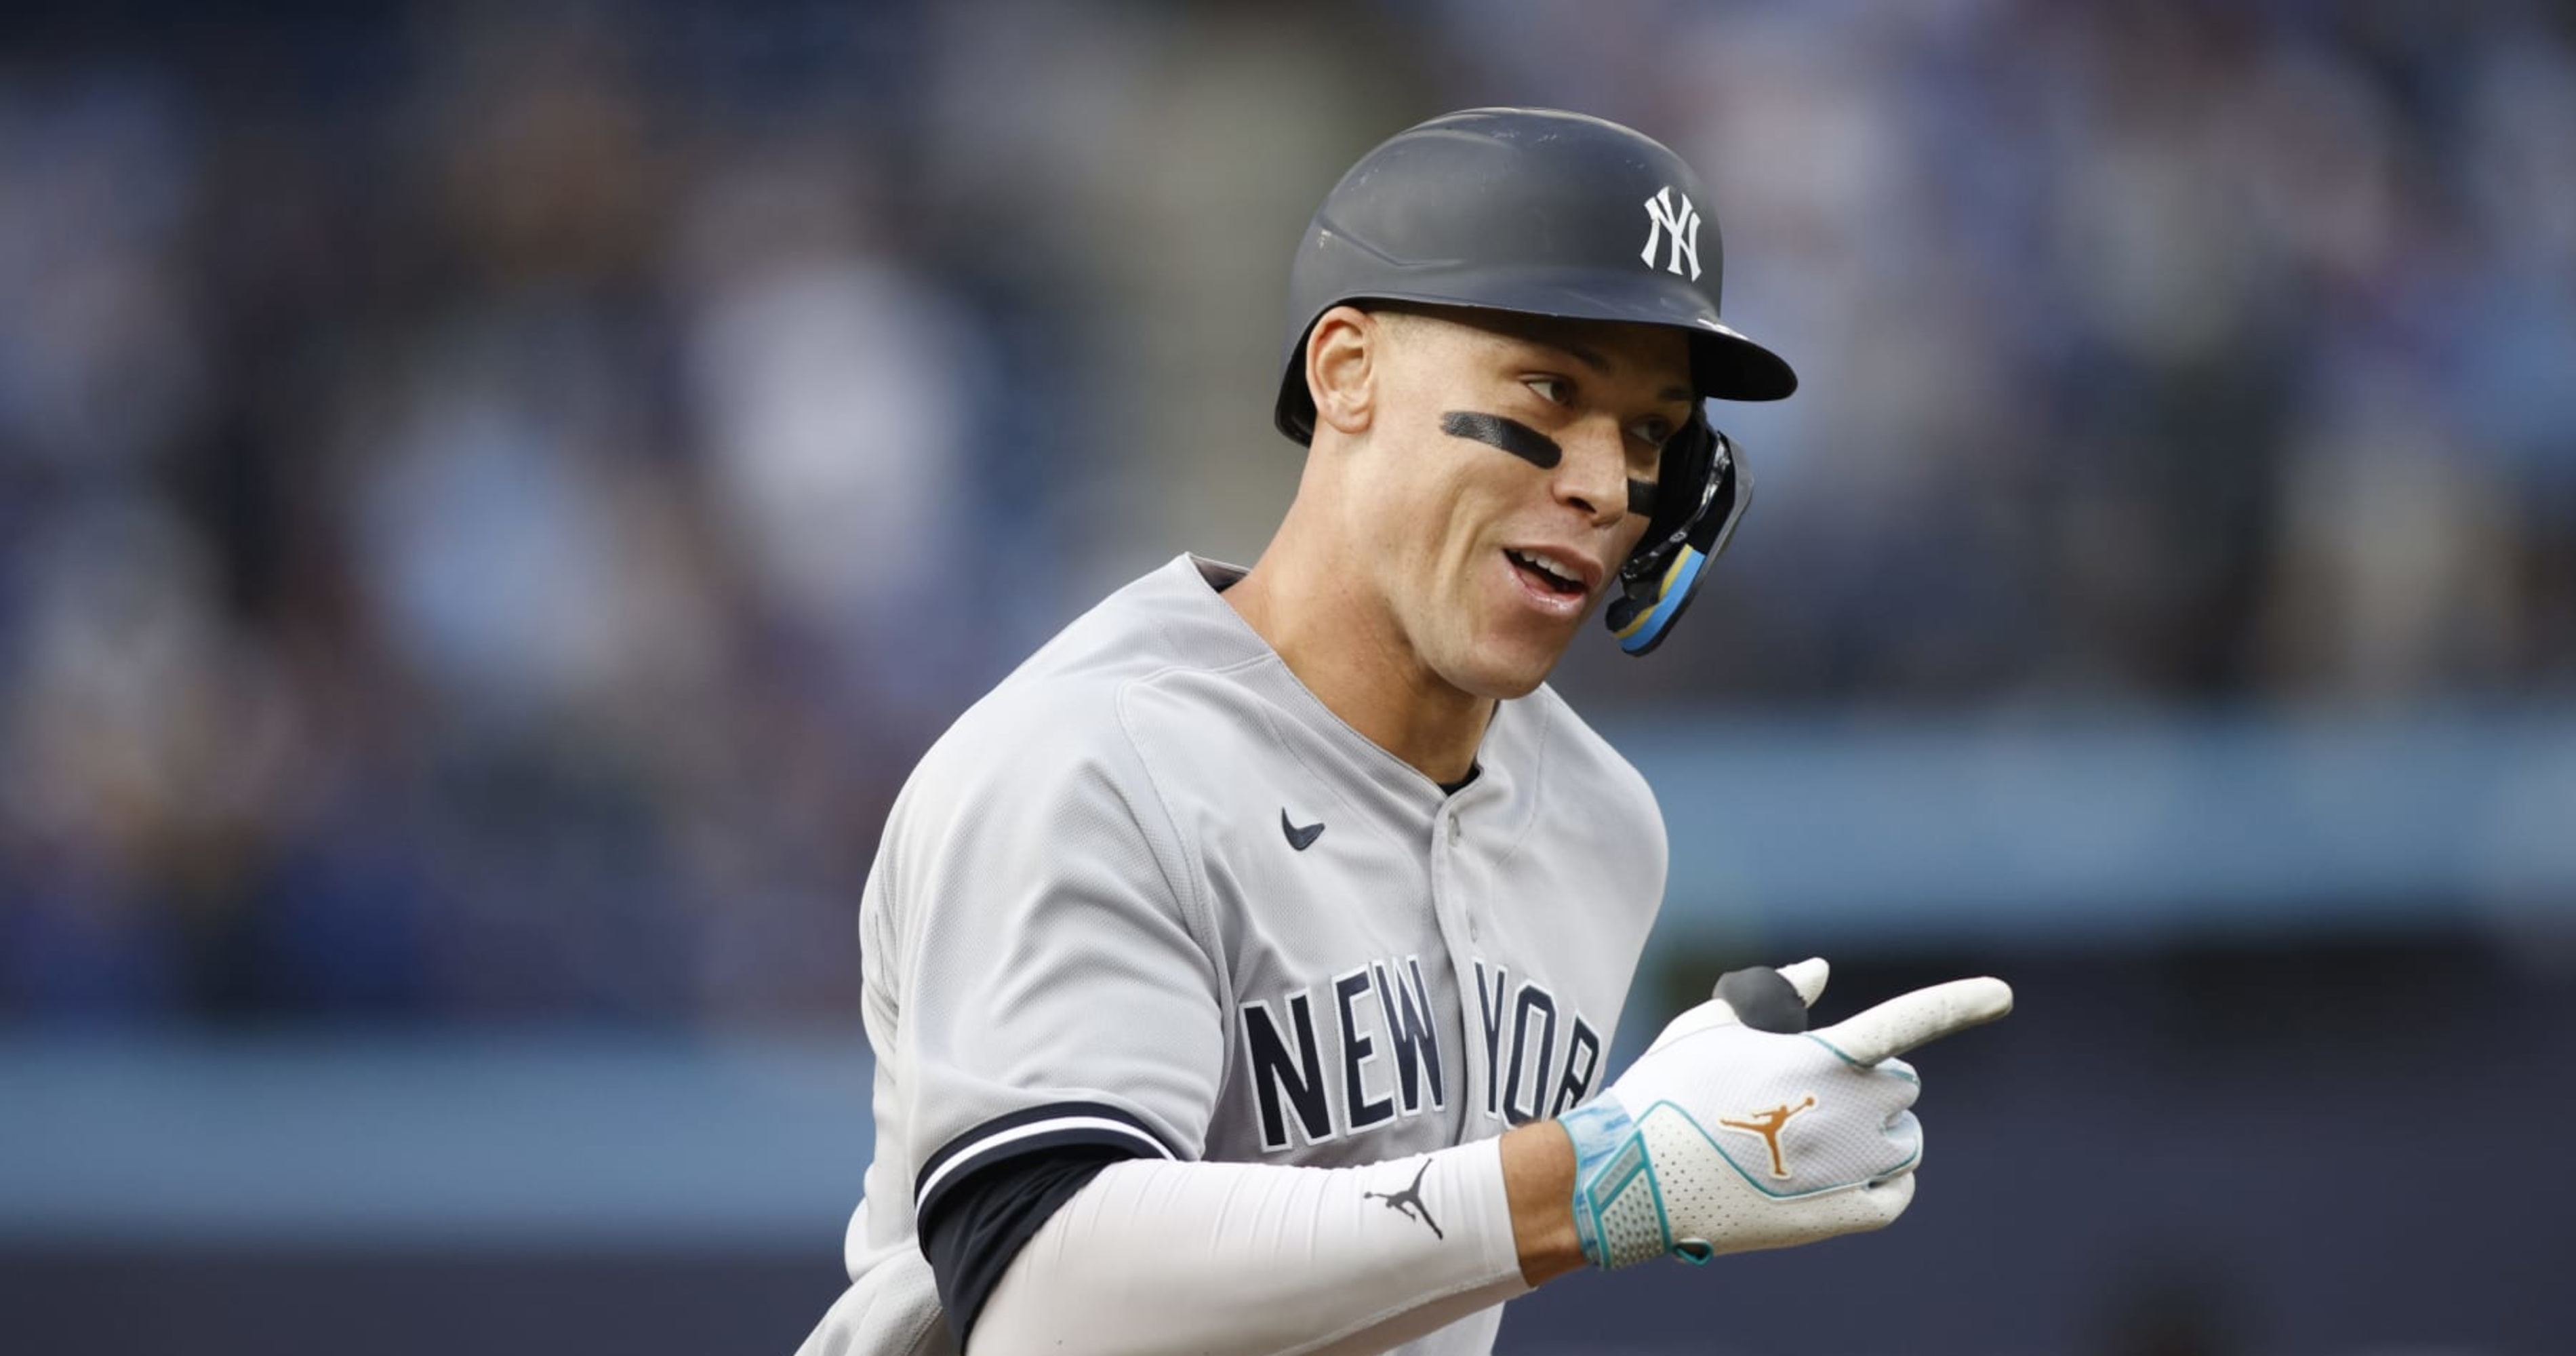 Aaron Judge hits back after New York Yankees star is accused of